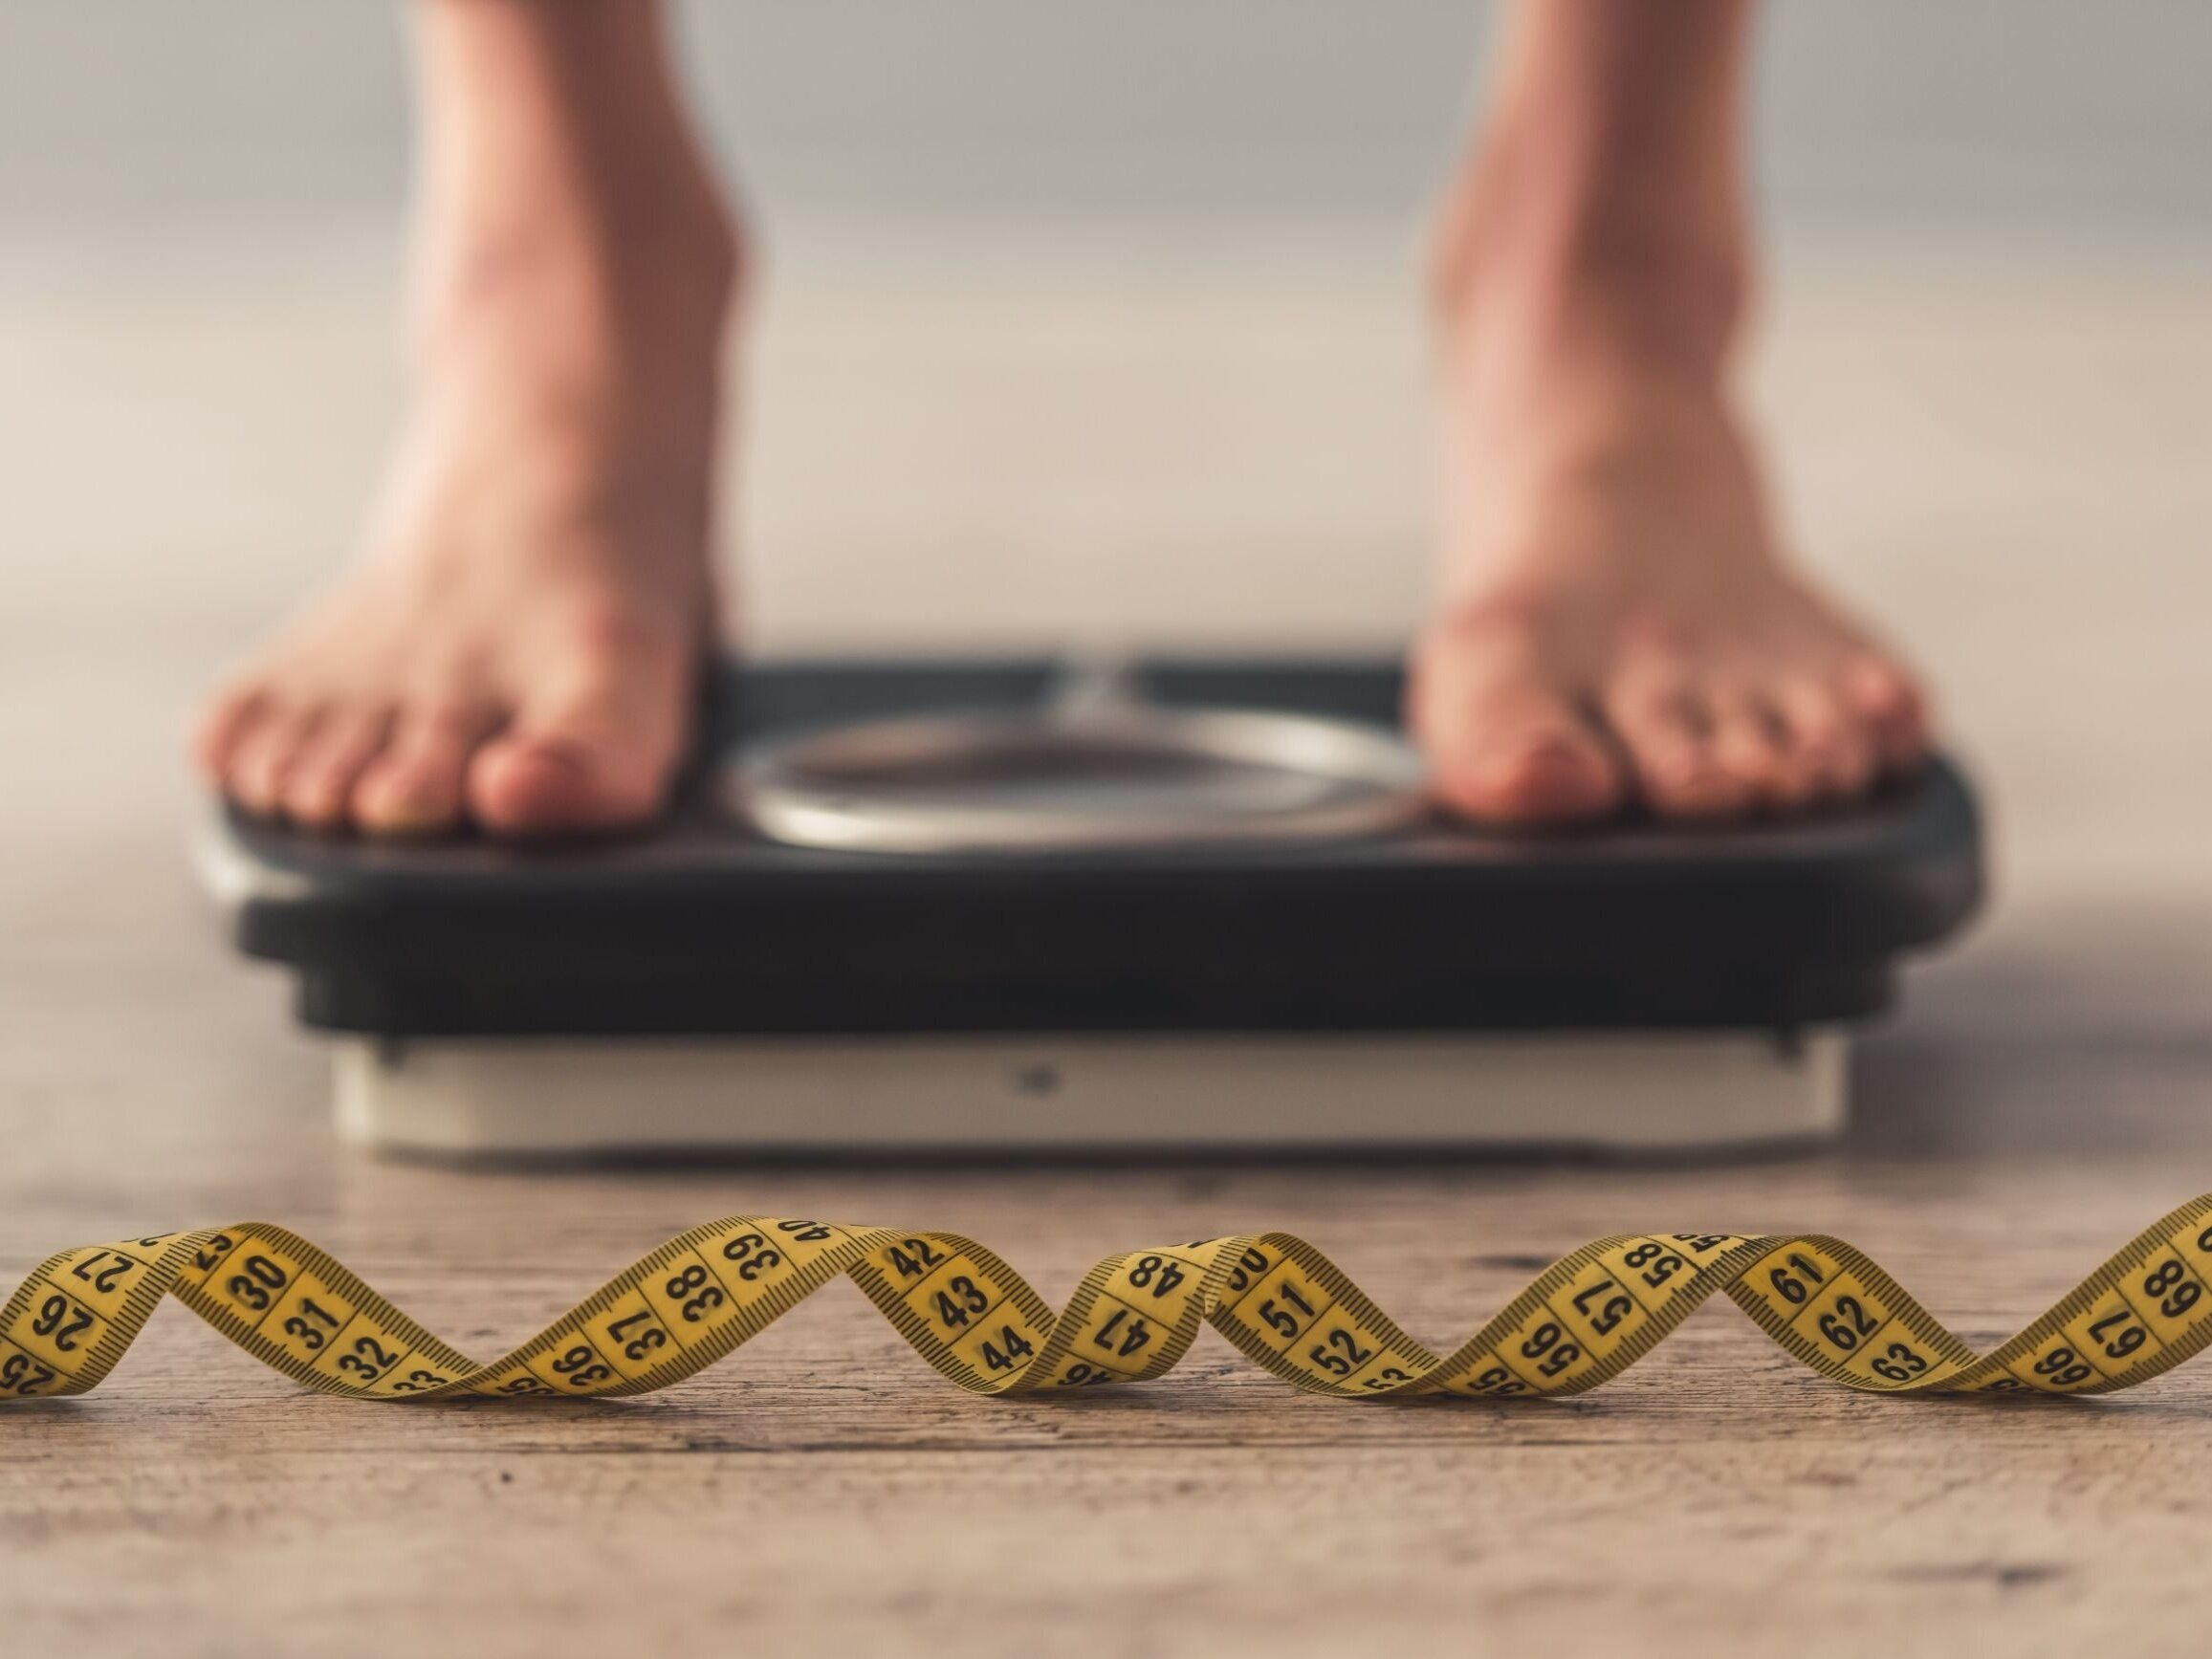 Sudden weight loss may be a symptom of pancreatic cancer.  Don't underestimate this